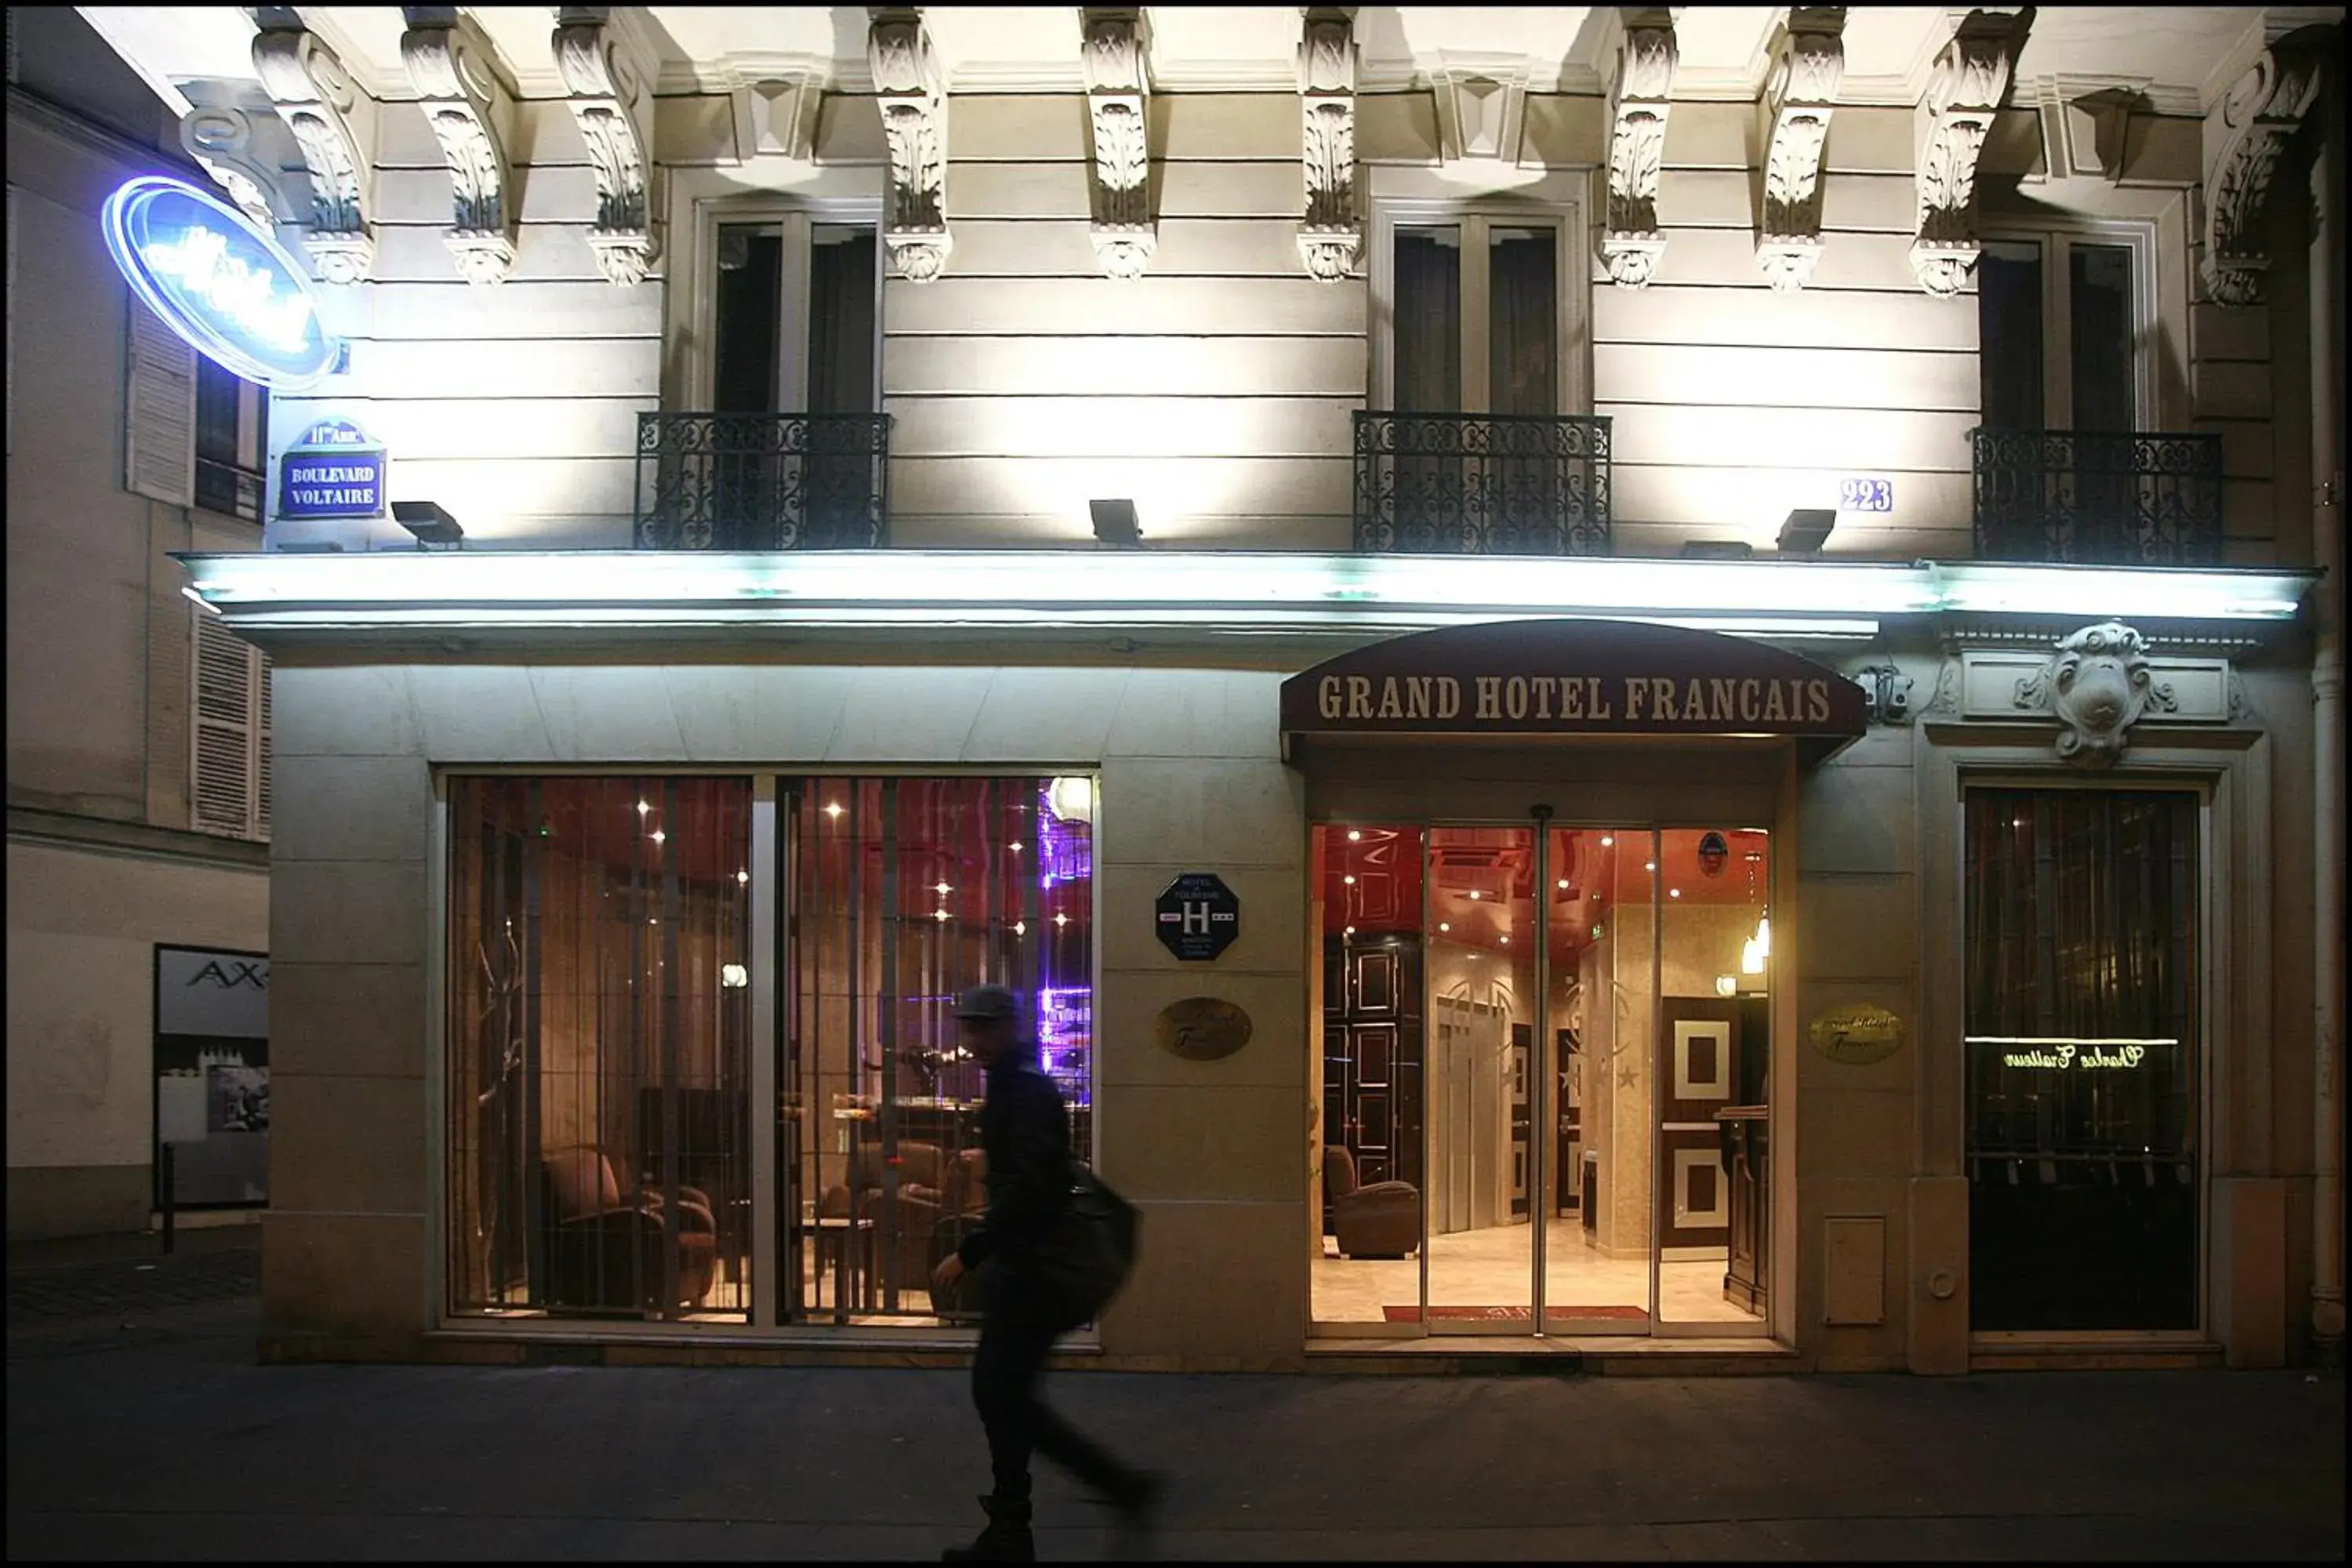 Property building in Grand Hotel Francais